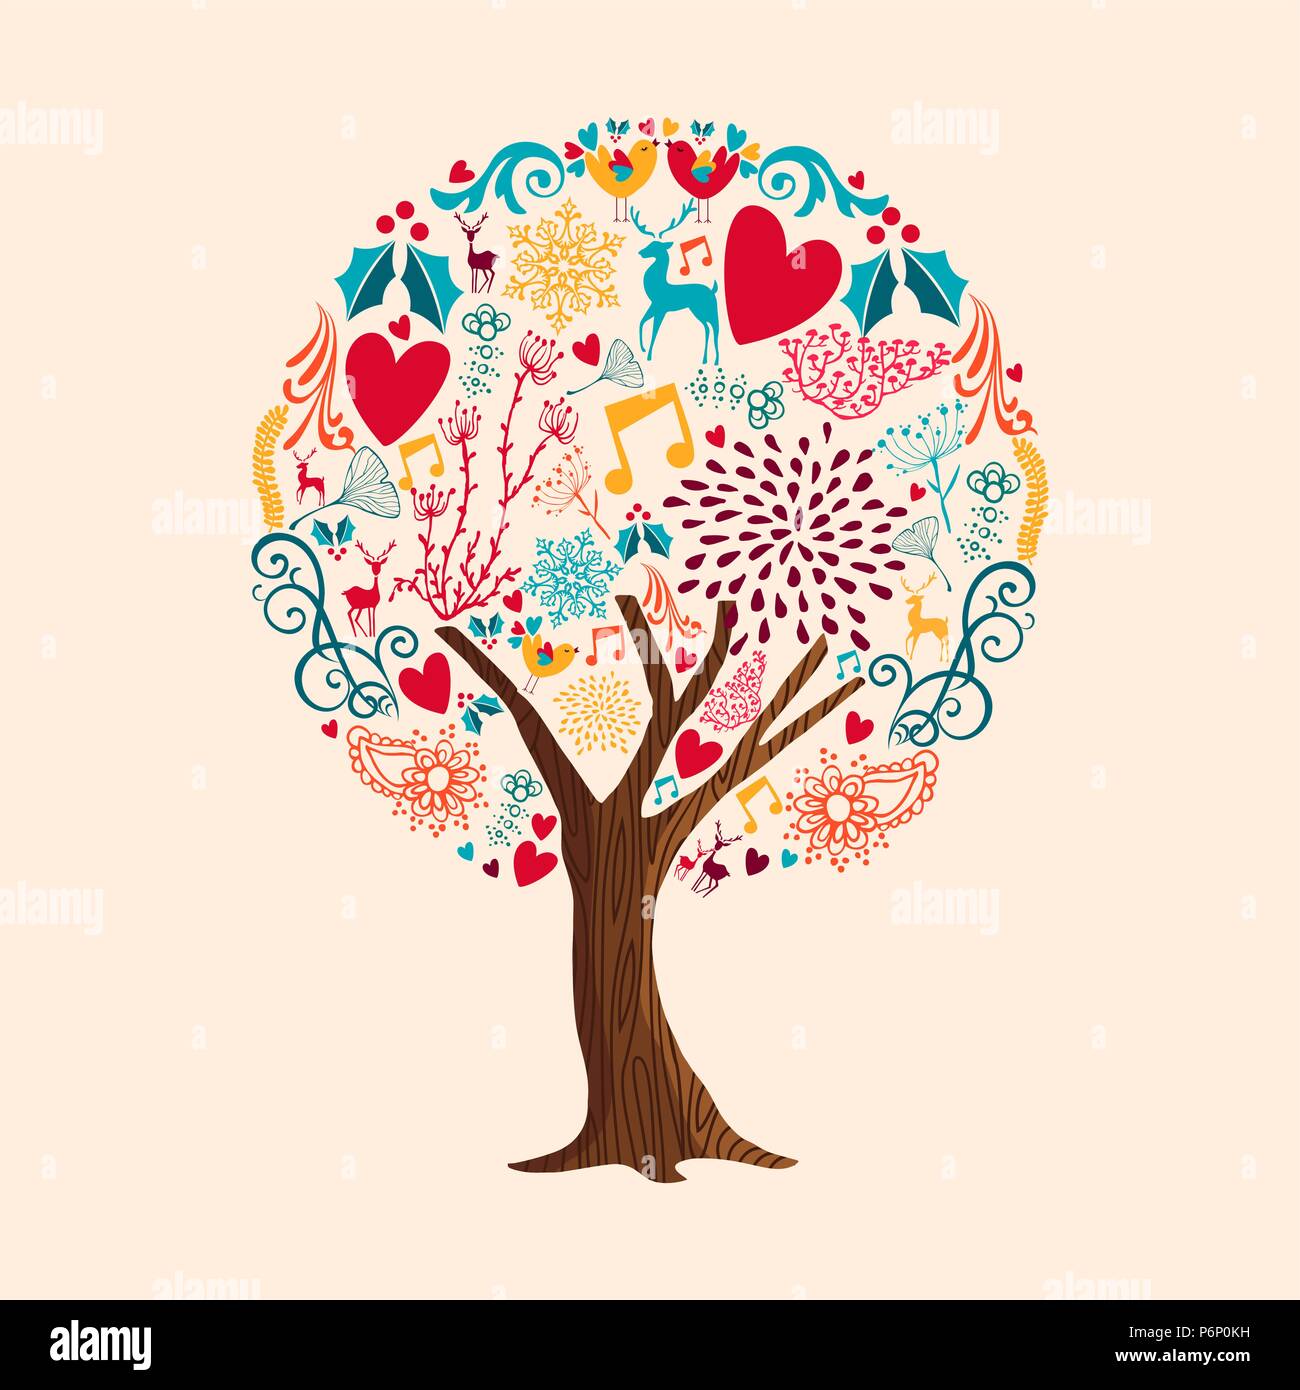 Tree made of vintage christmas ornament icons. Xmas season love concept greeting card with deer, flowers and winter decoration. EPS10 vector. Stock Vector